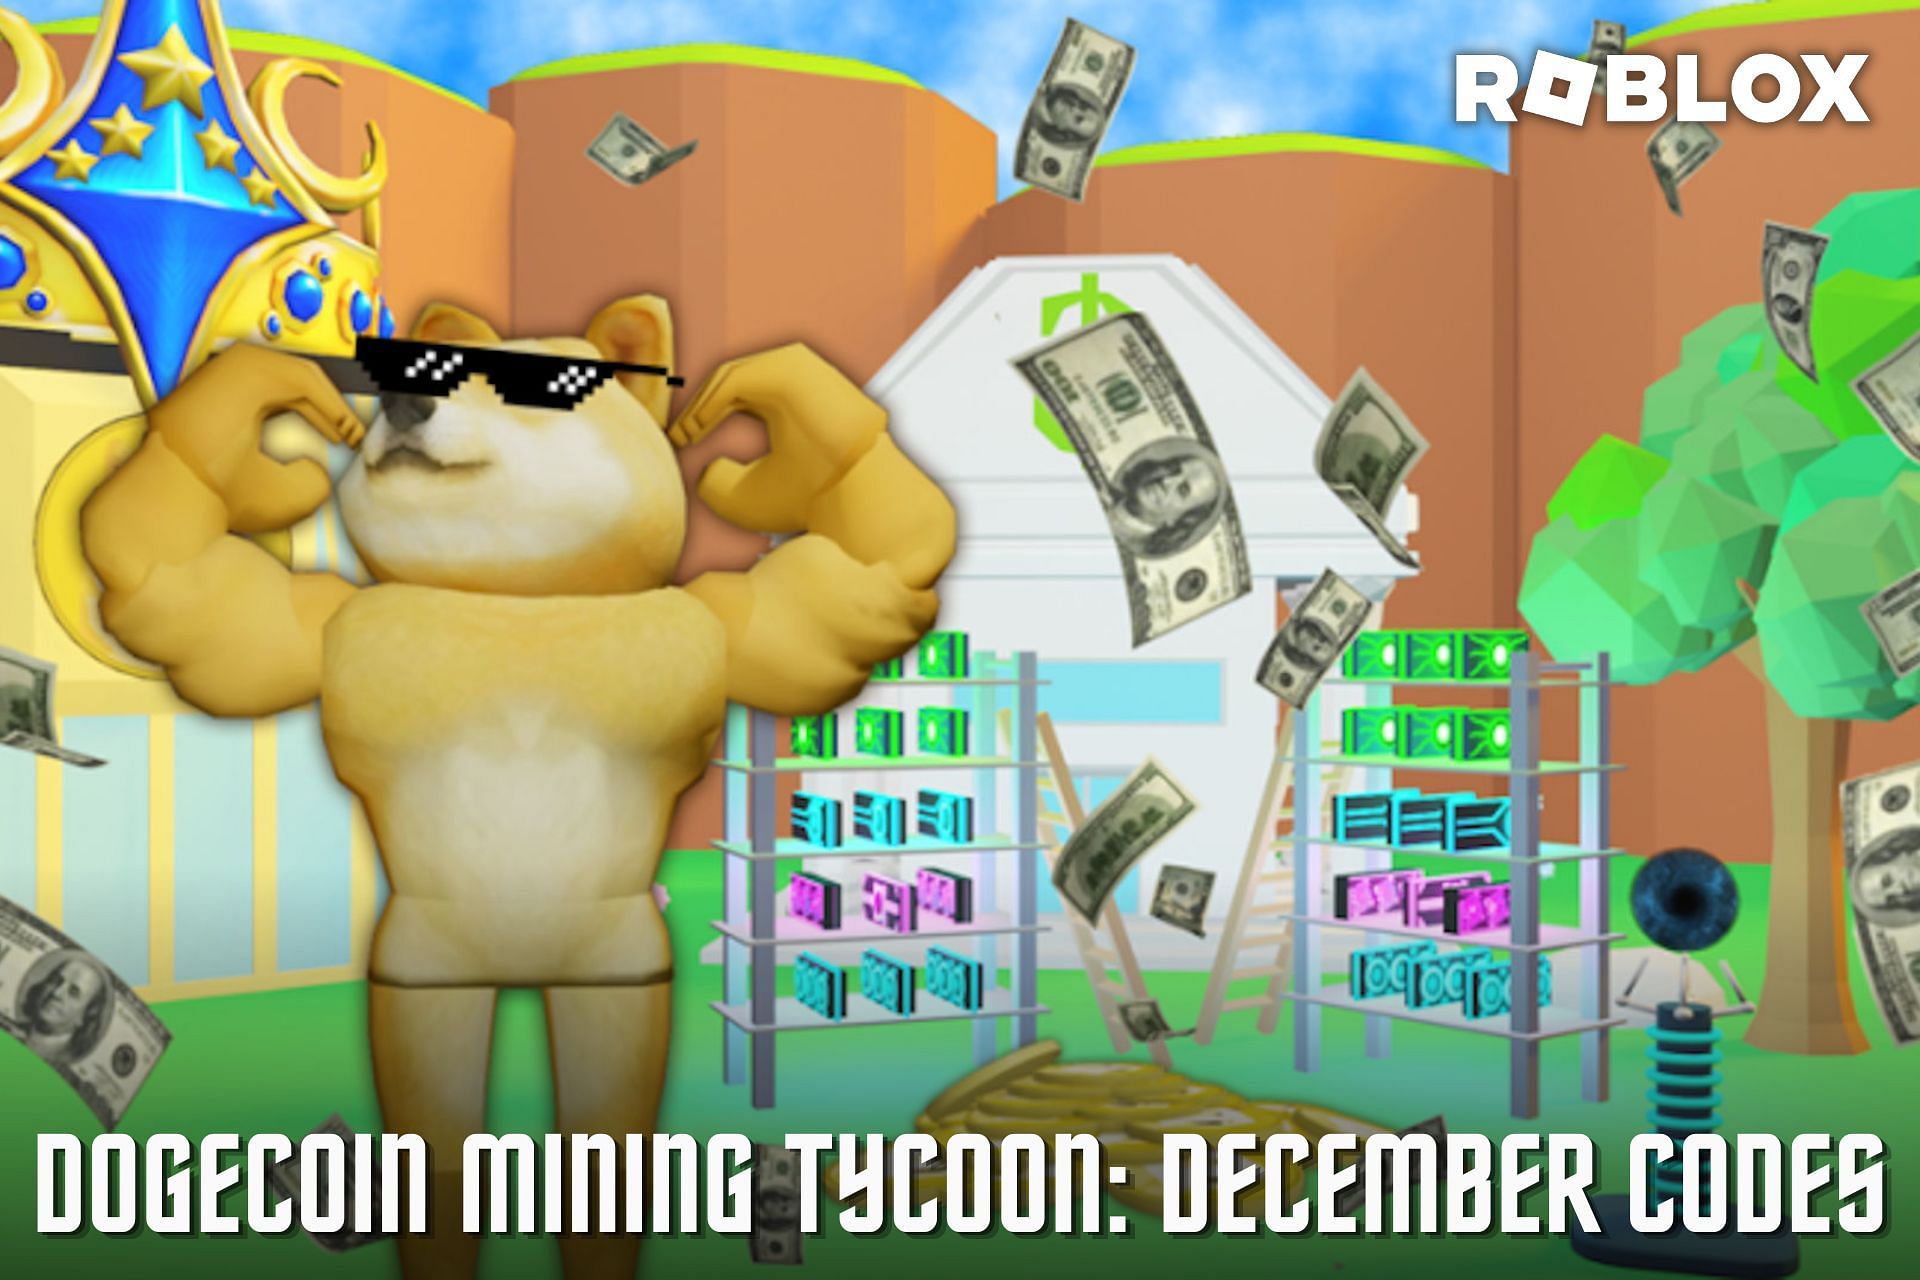 Roblox Dogecoin Mining Tycoon Gameplay